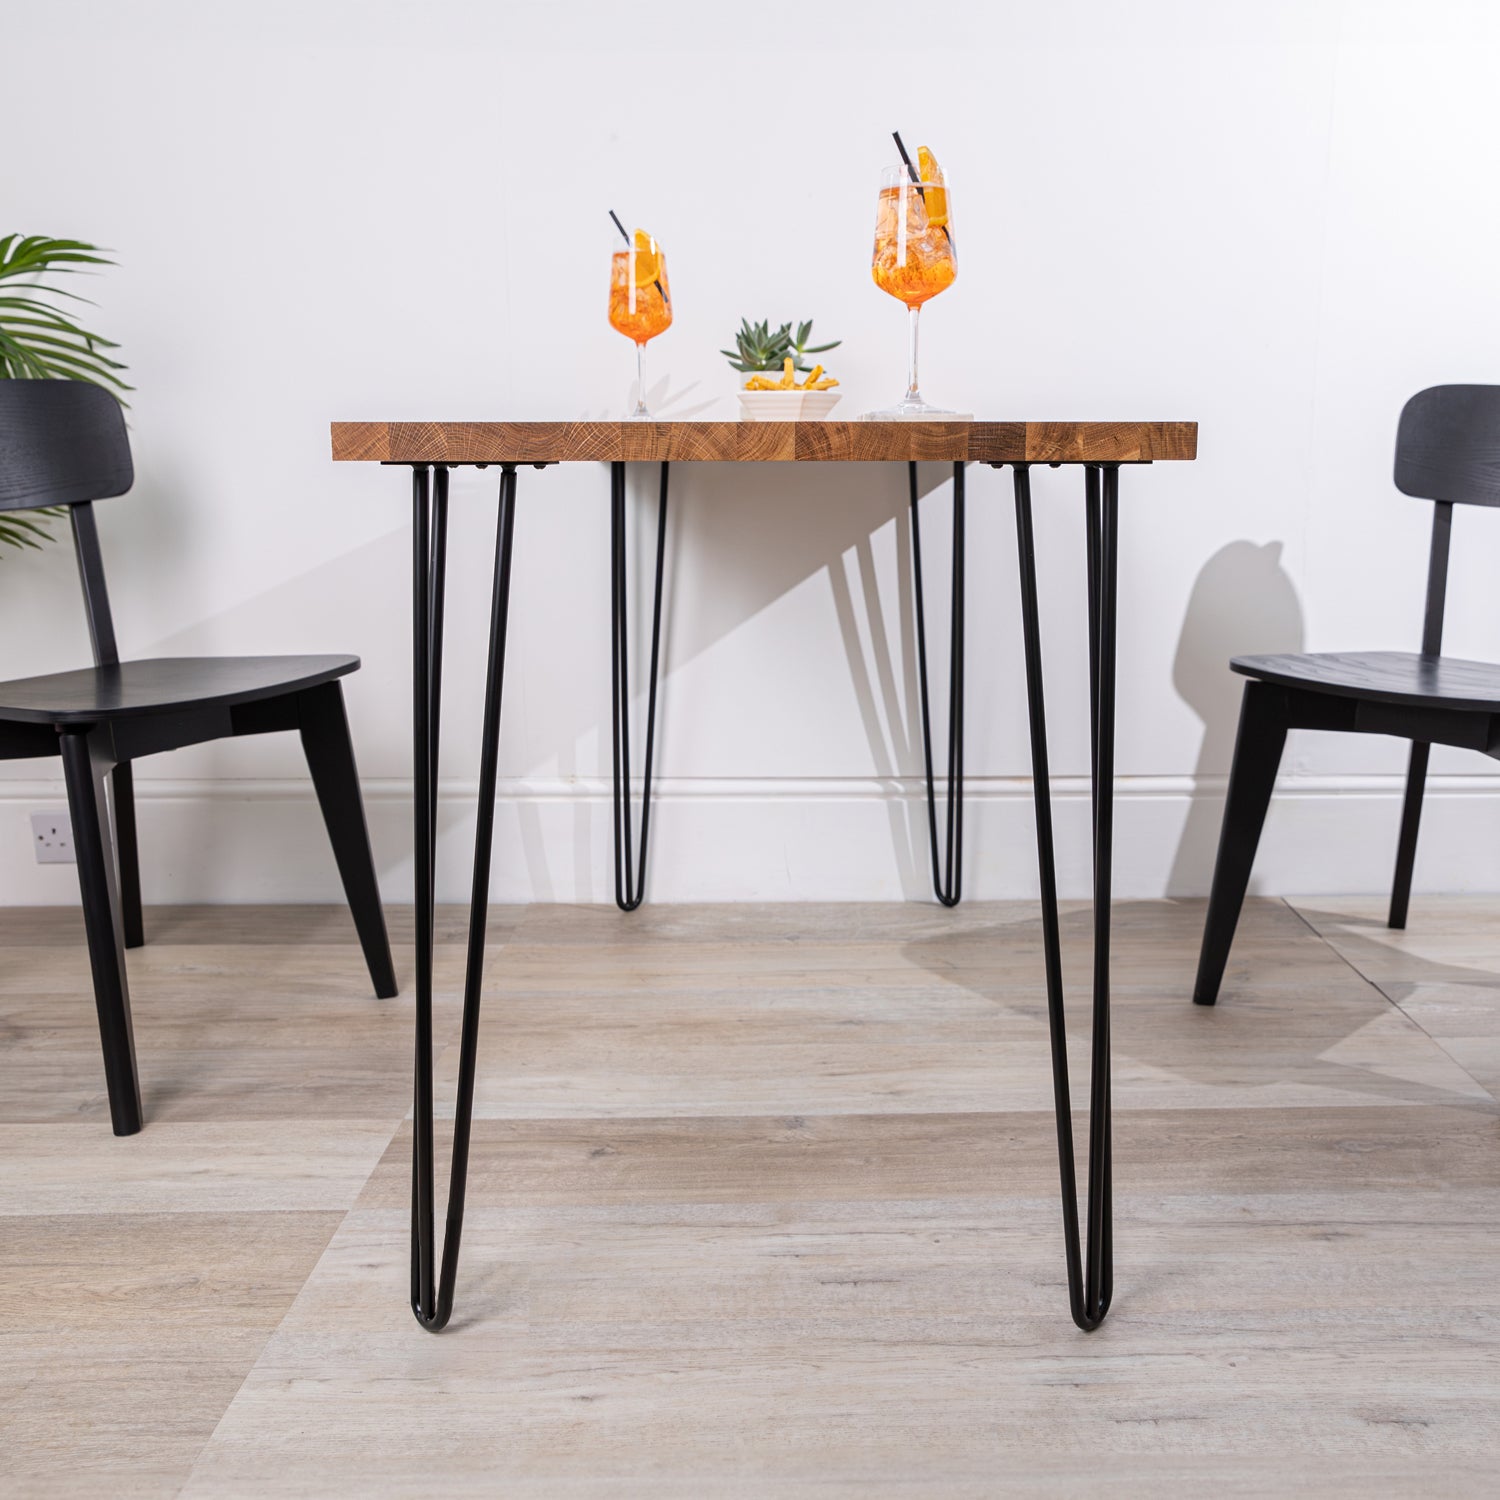 Solid Oak Table with Hairpin Legs